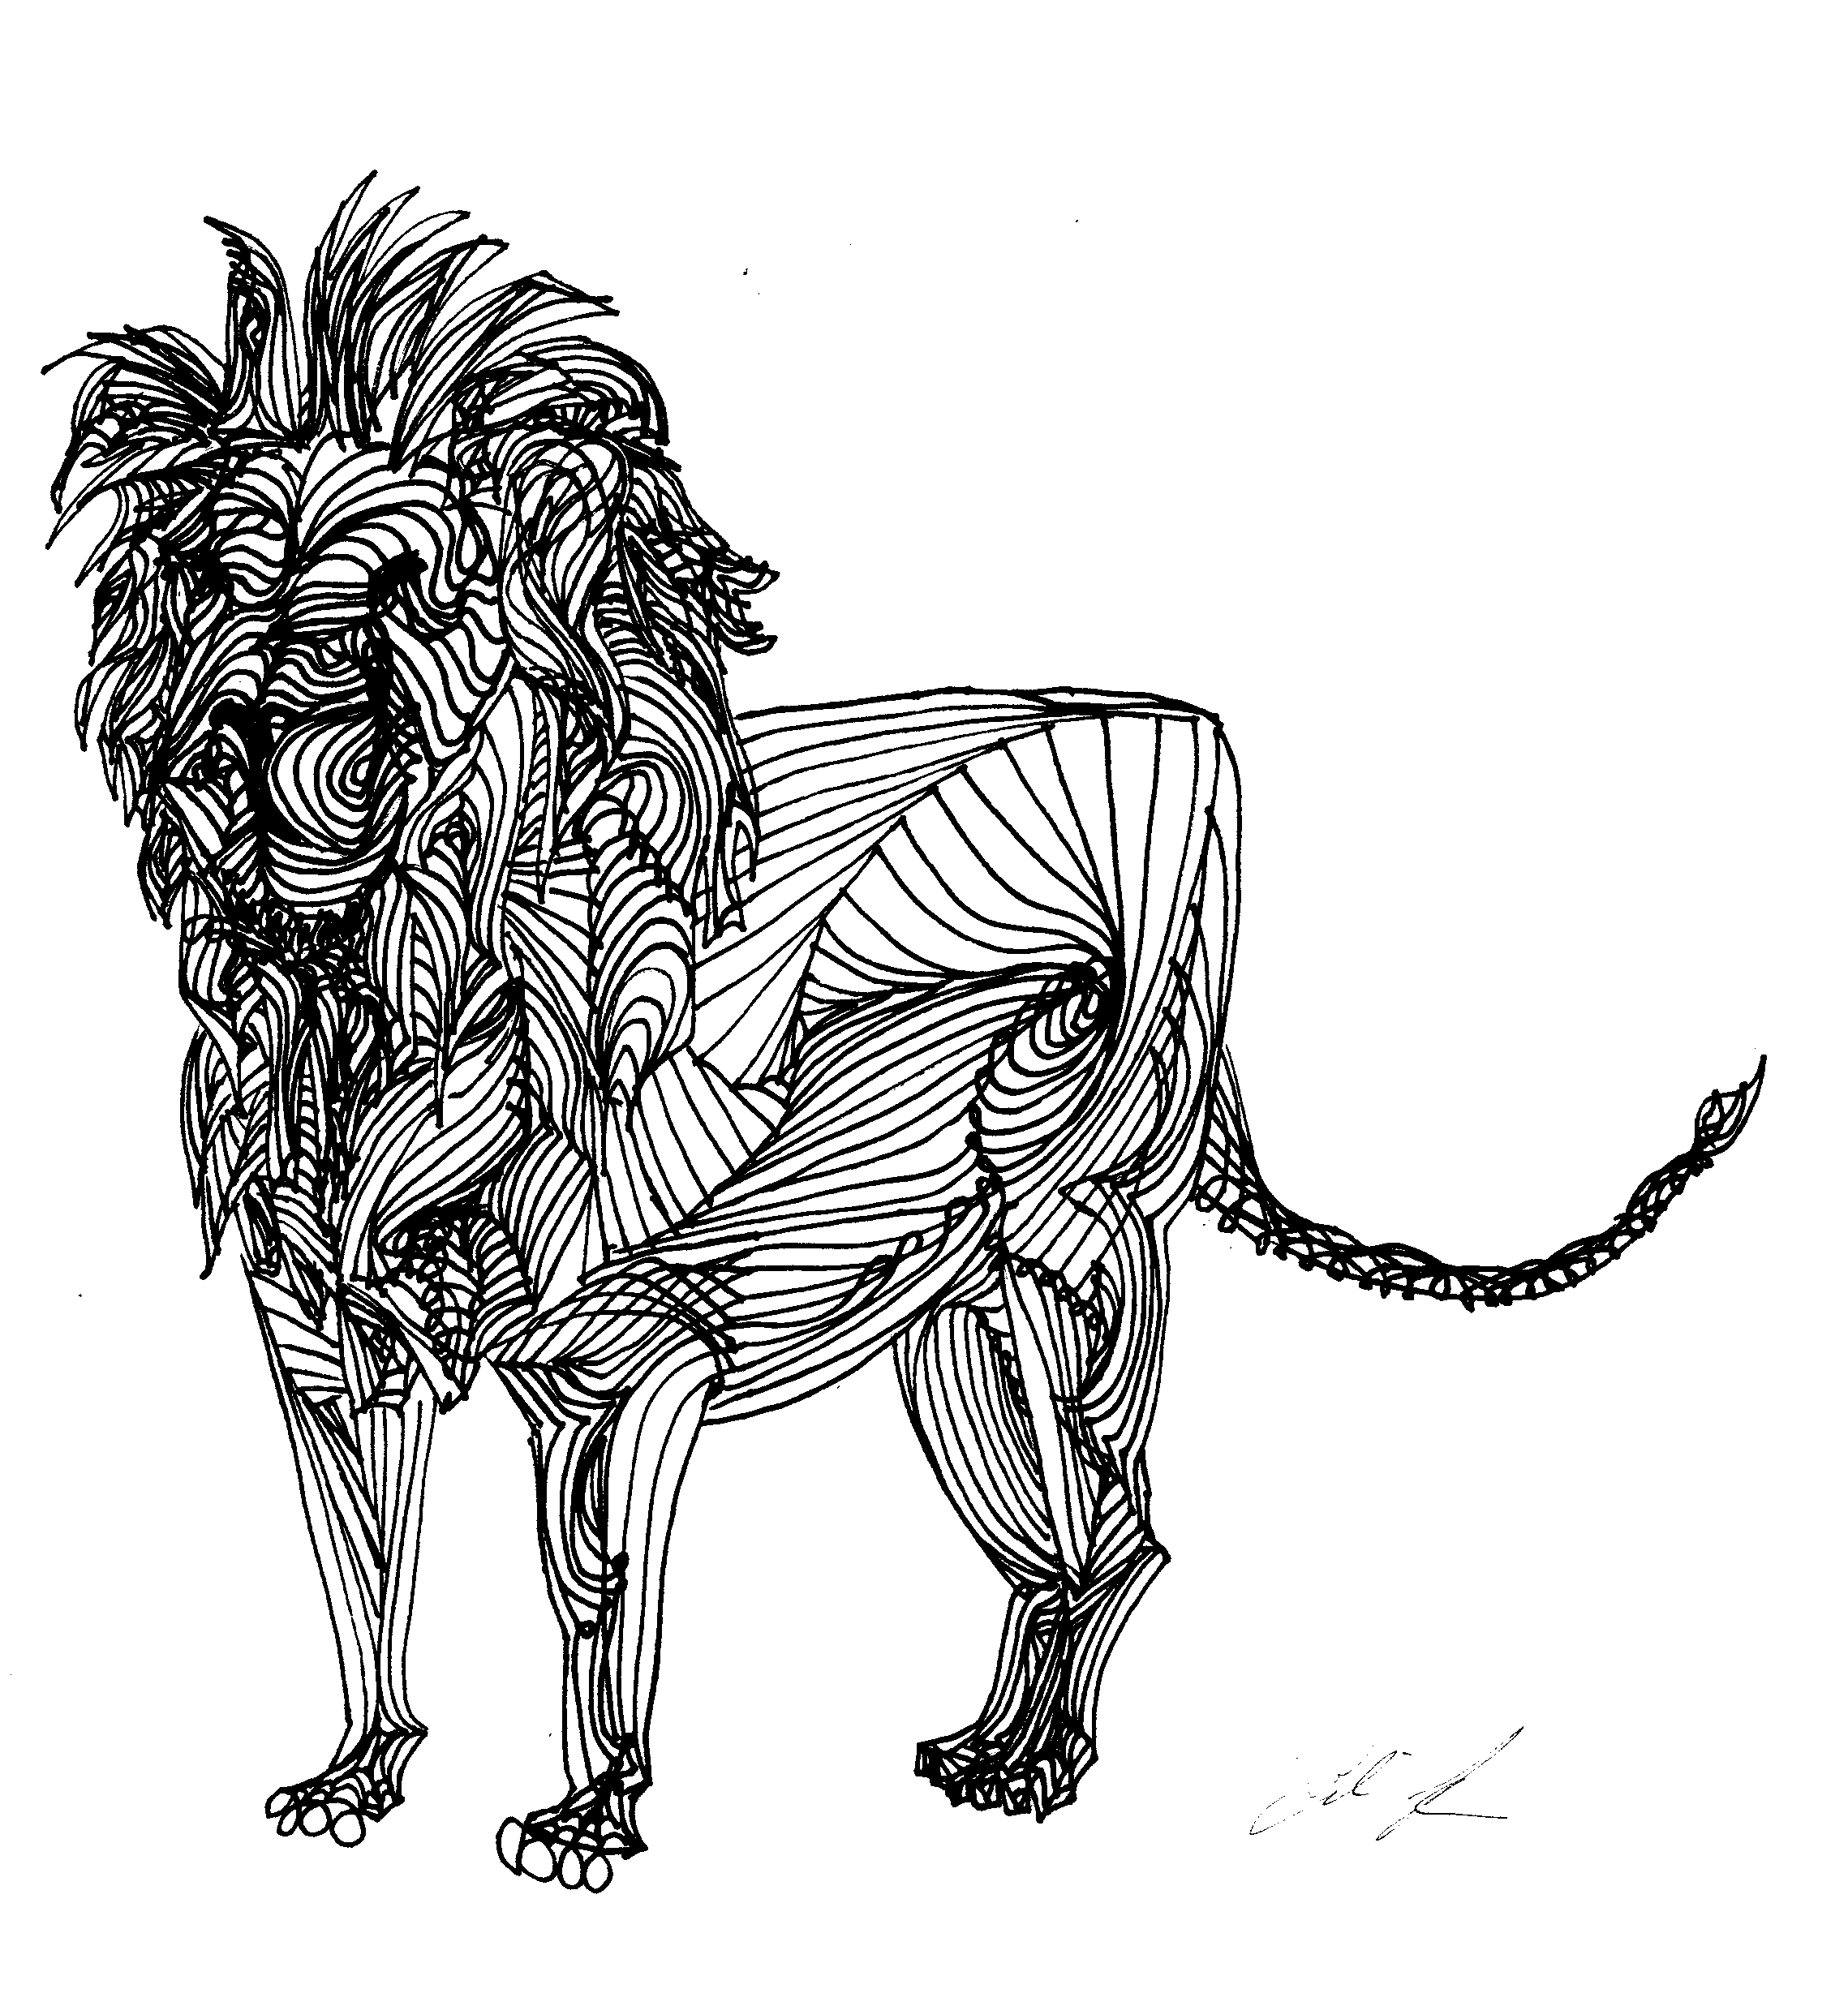 Line Drawing Of Lion - www.inf-inet.com